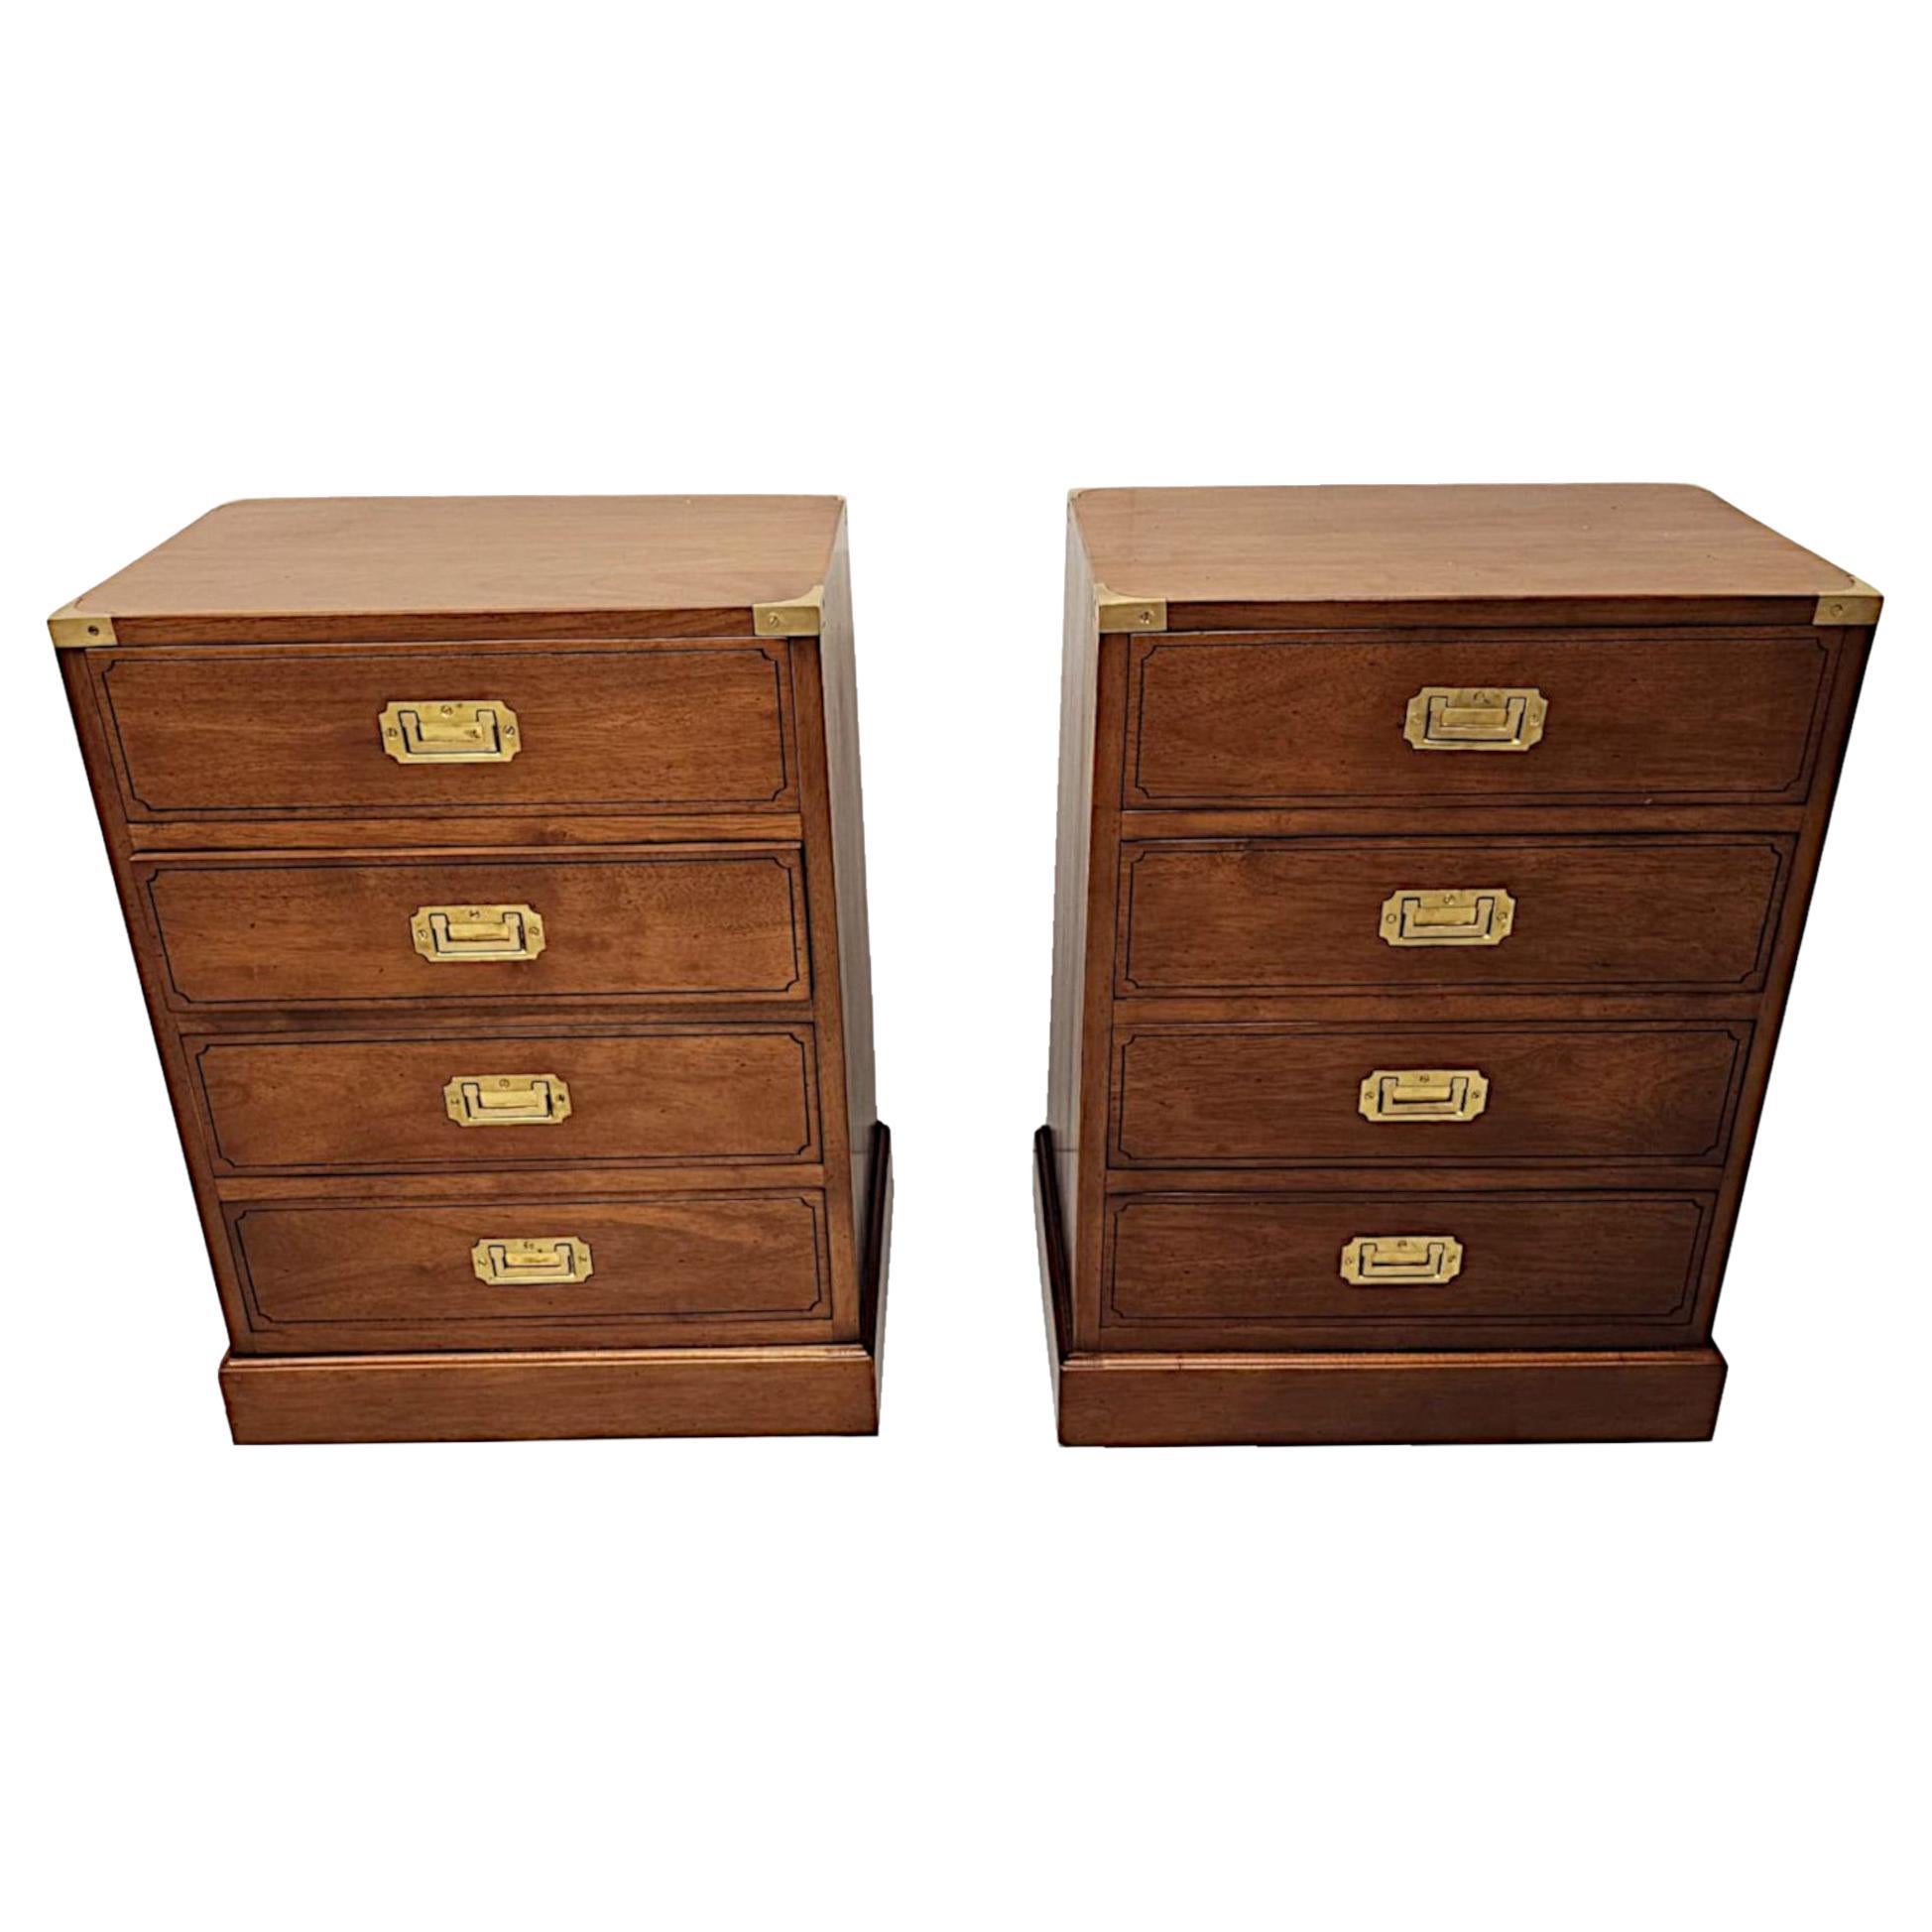 A Very Fine Pair of Hand Made Bedside Chests in the Campaign Style For Sale